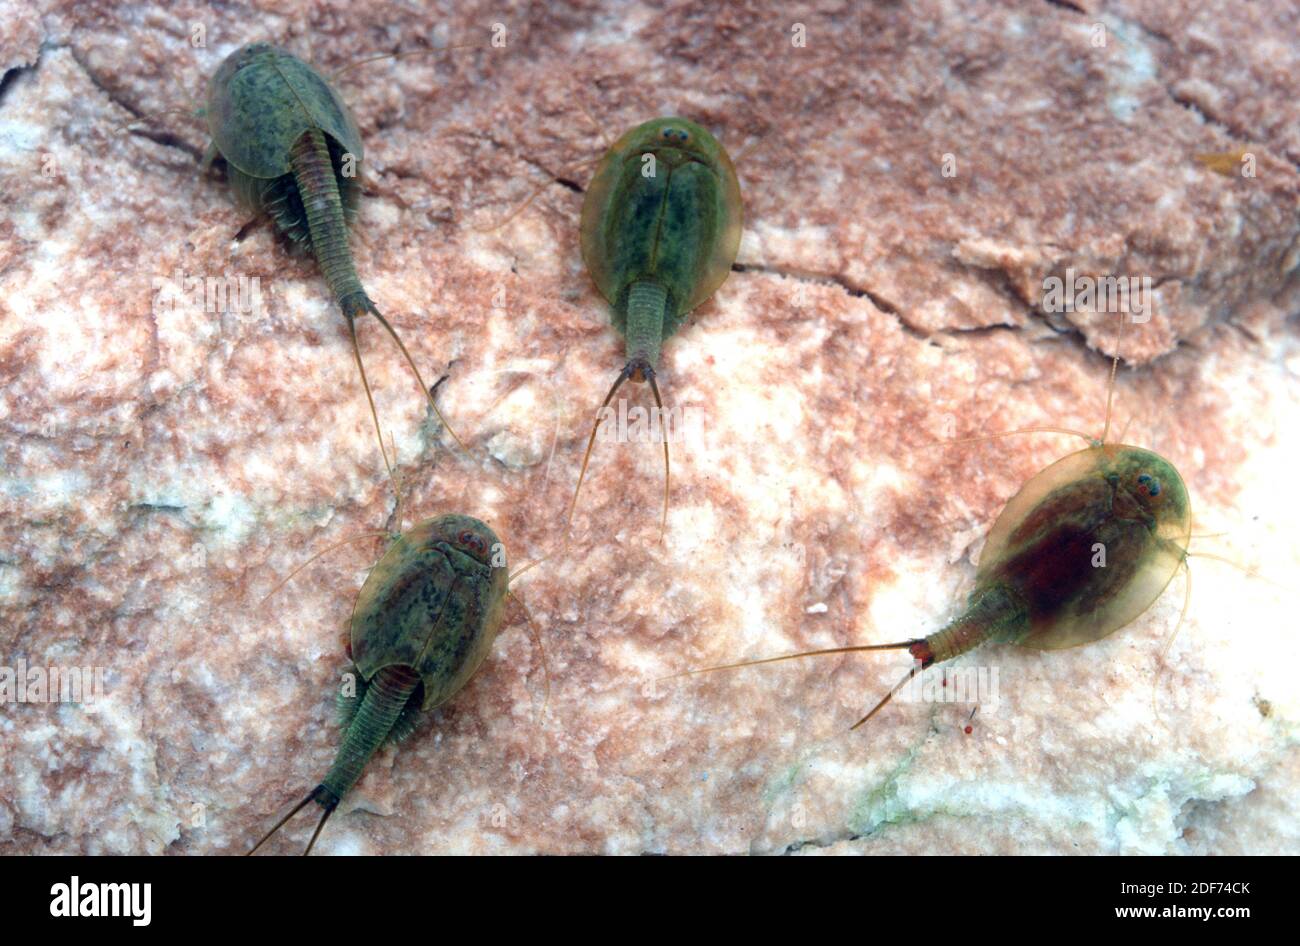 Tadpole shrimp (Triops cancriformis) is a freshwater crustacean native to Europe, northern Africa and Middle East. Is a living fossil. This photo was Stock Photo